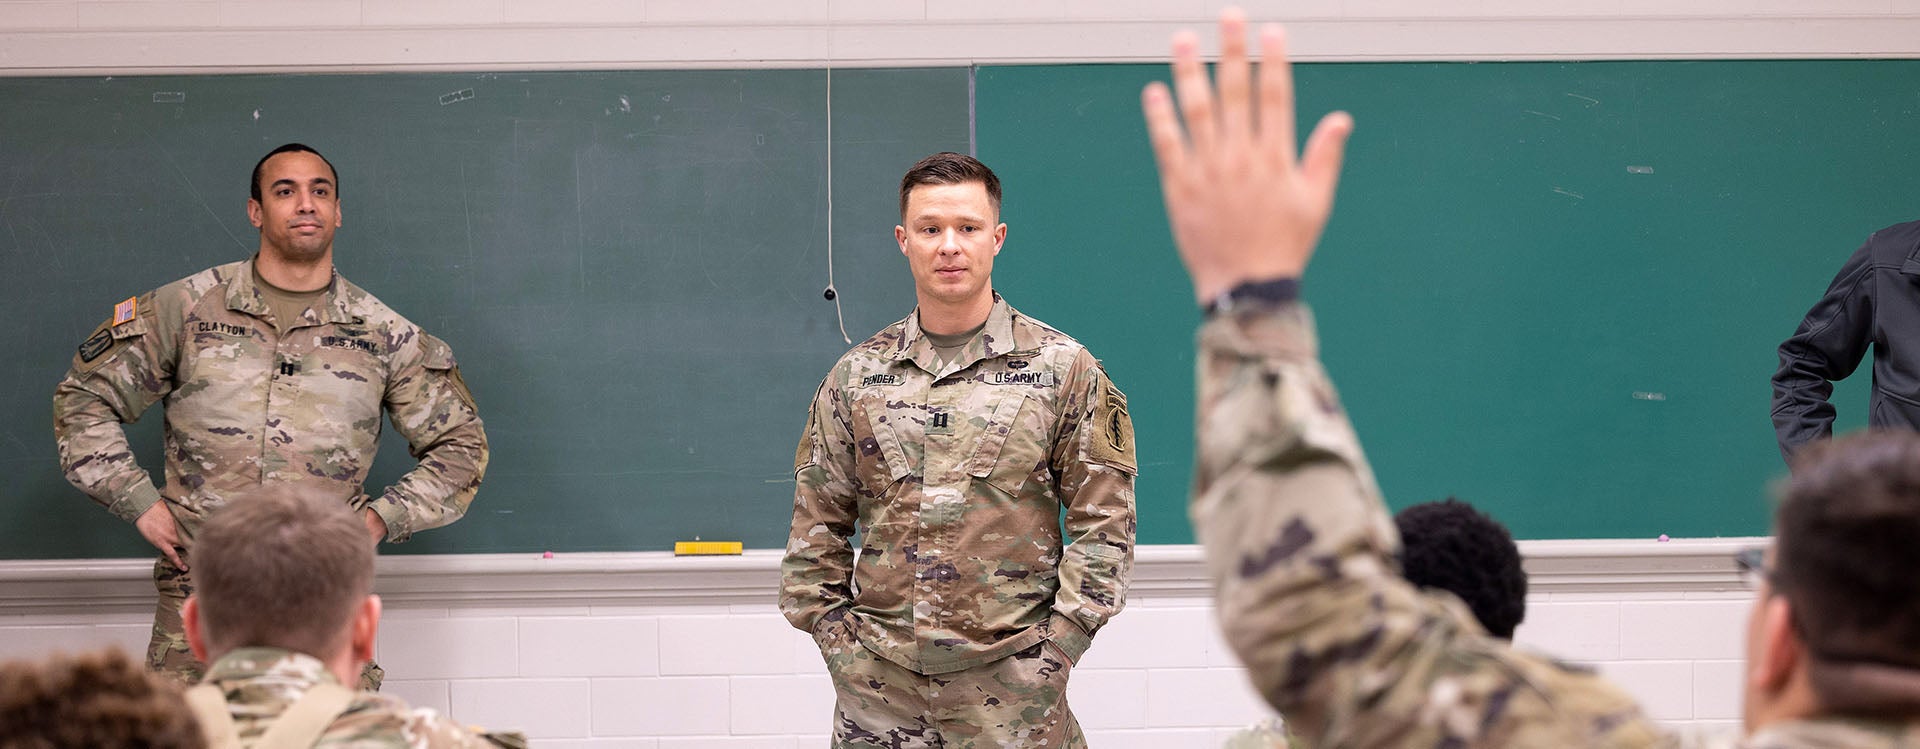 112th Signal Battalion Special  Operations Airborne member Ausdin Pender speaks to a group of ROTC students at ECU. (Photo by Rhett Butler)